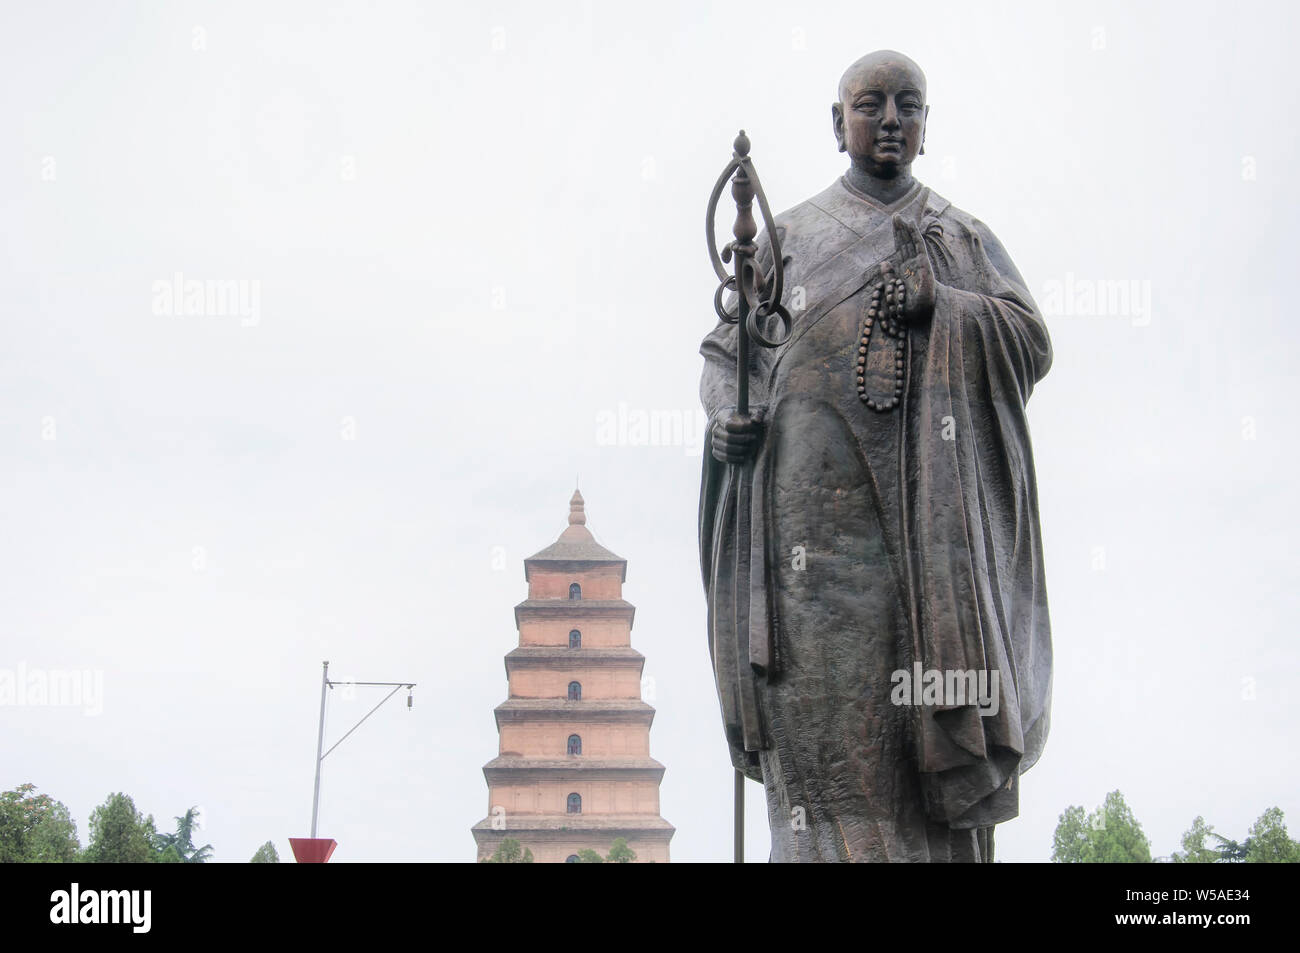 Monk Xuanzang statue of the Tang Dynasty near the Big wild goose pagoda in the city of Xian in Shaanxi province China. Stock Photo